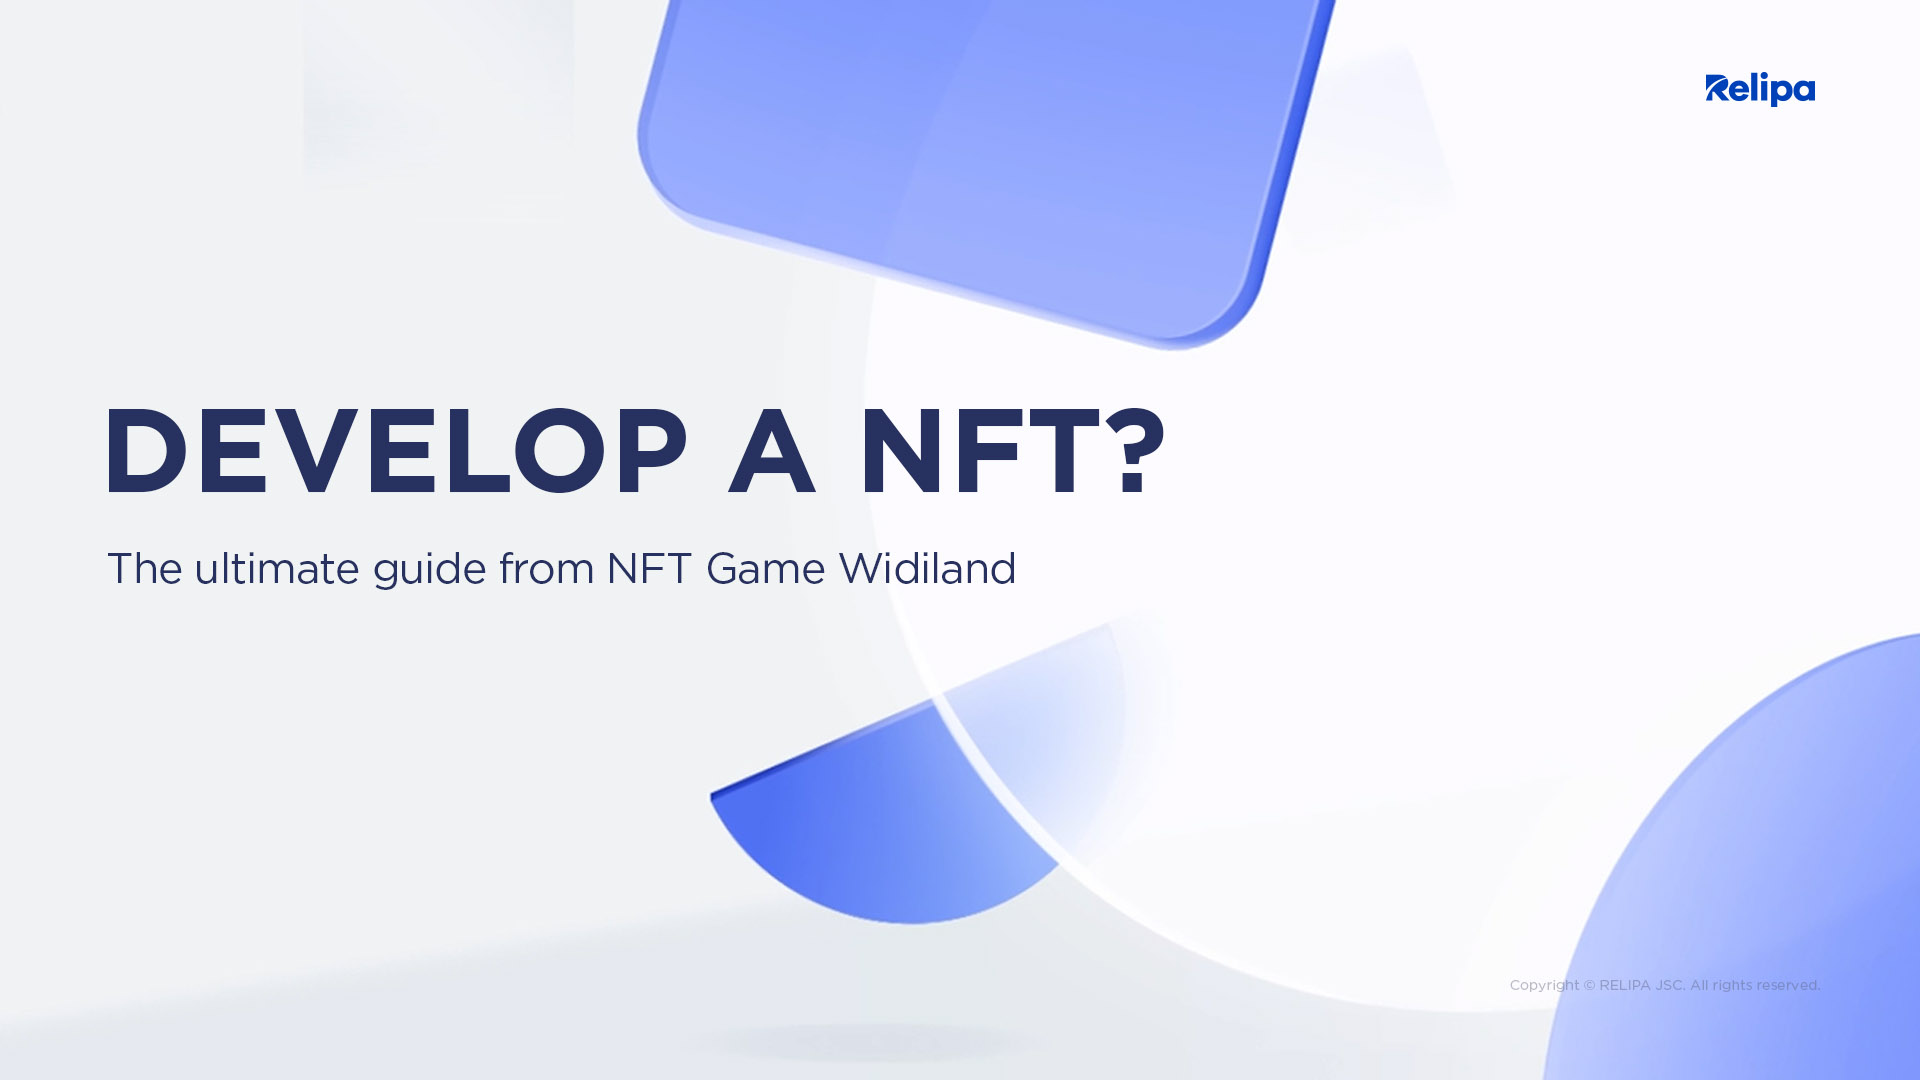 NFT Development - The ultimate guide from NFT Game Widiland